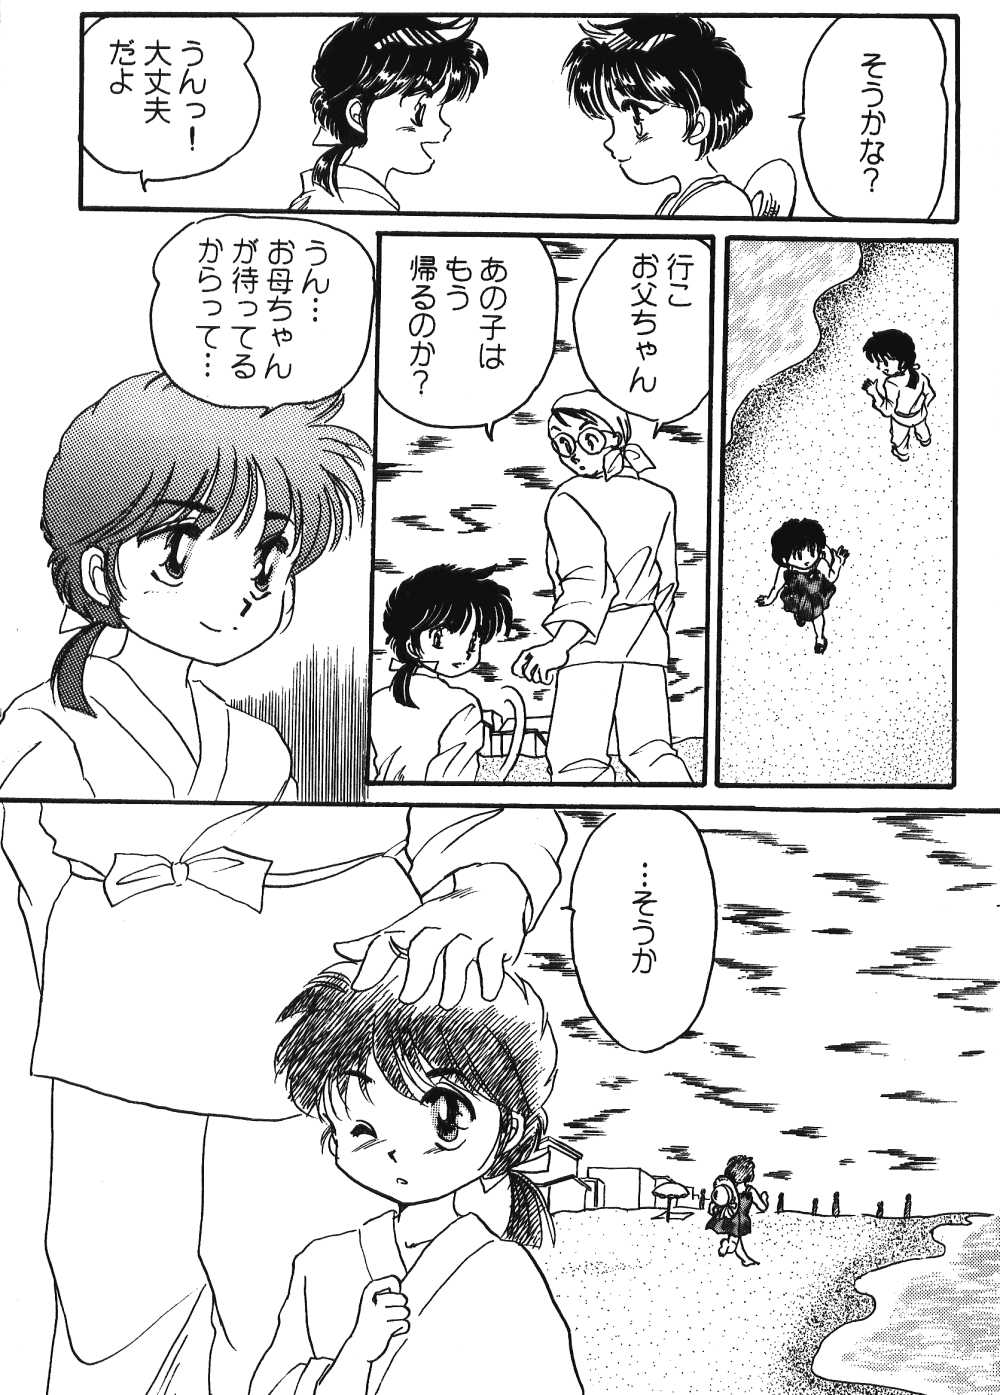 Never Forget Summer (Ranma 1/2) 17